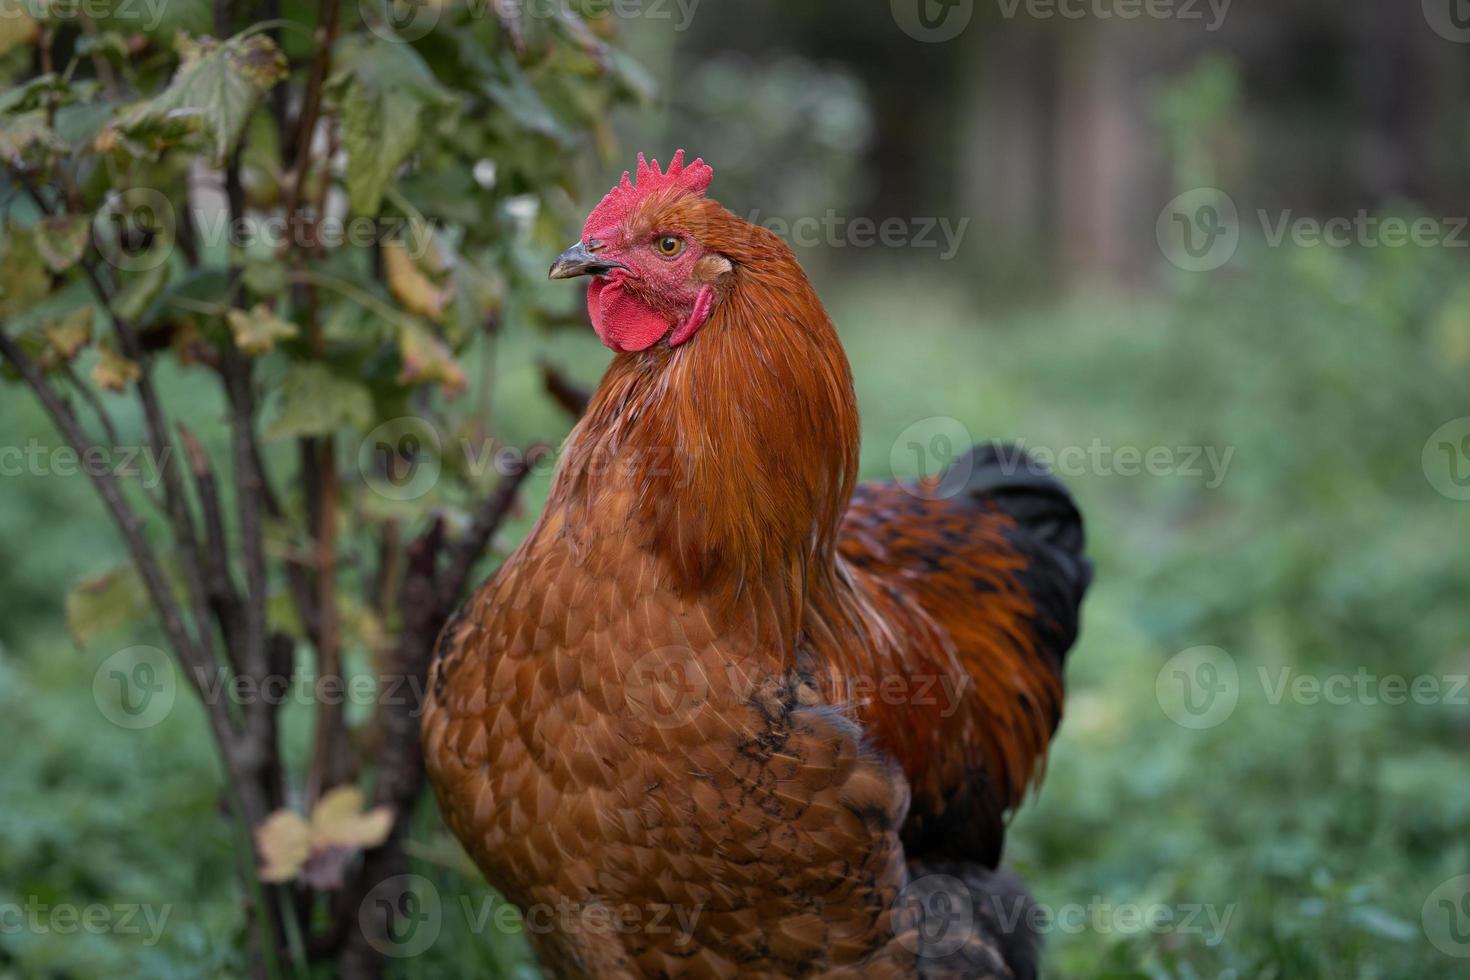 beautiful chickens and roosters outdoors in the yard. photo